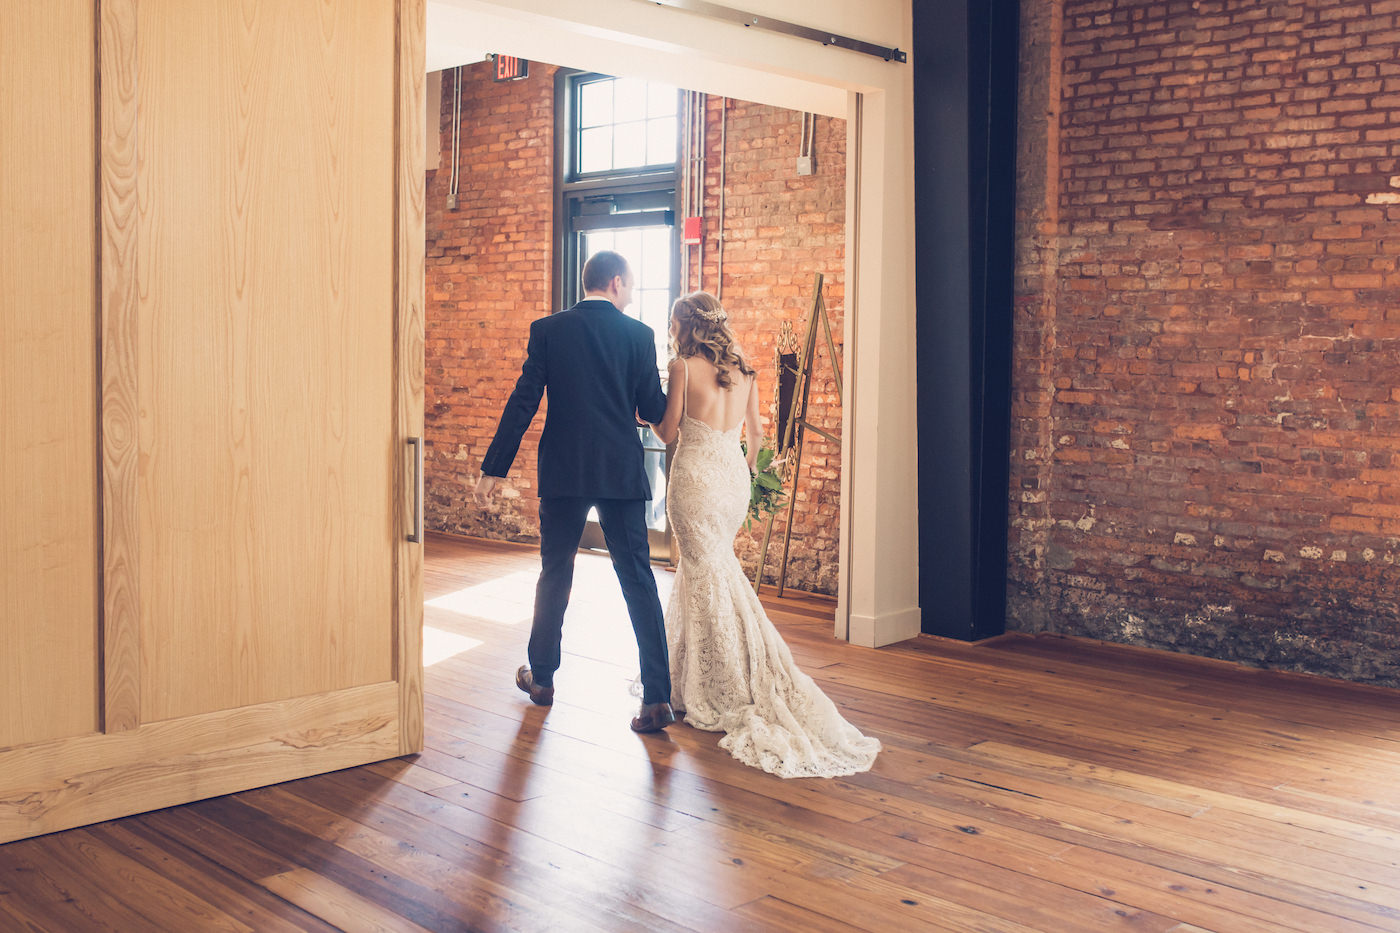 Bride and Groom Ceremony Exit at Tampa Wedding in Historic Venue | Tampa Wedding Photographer Luxe Light Images